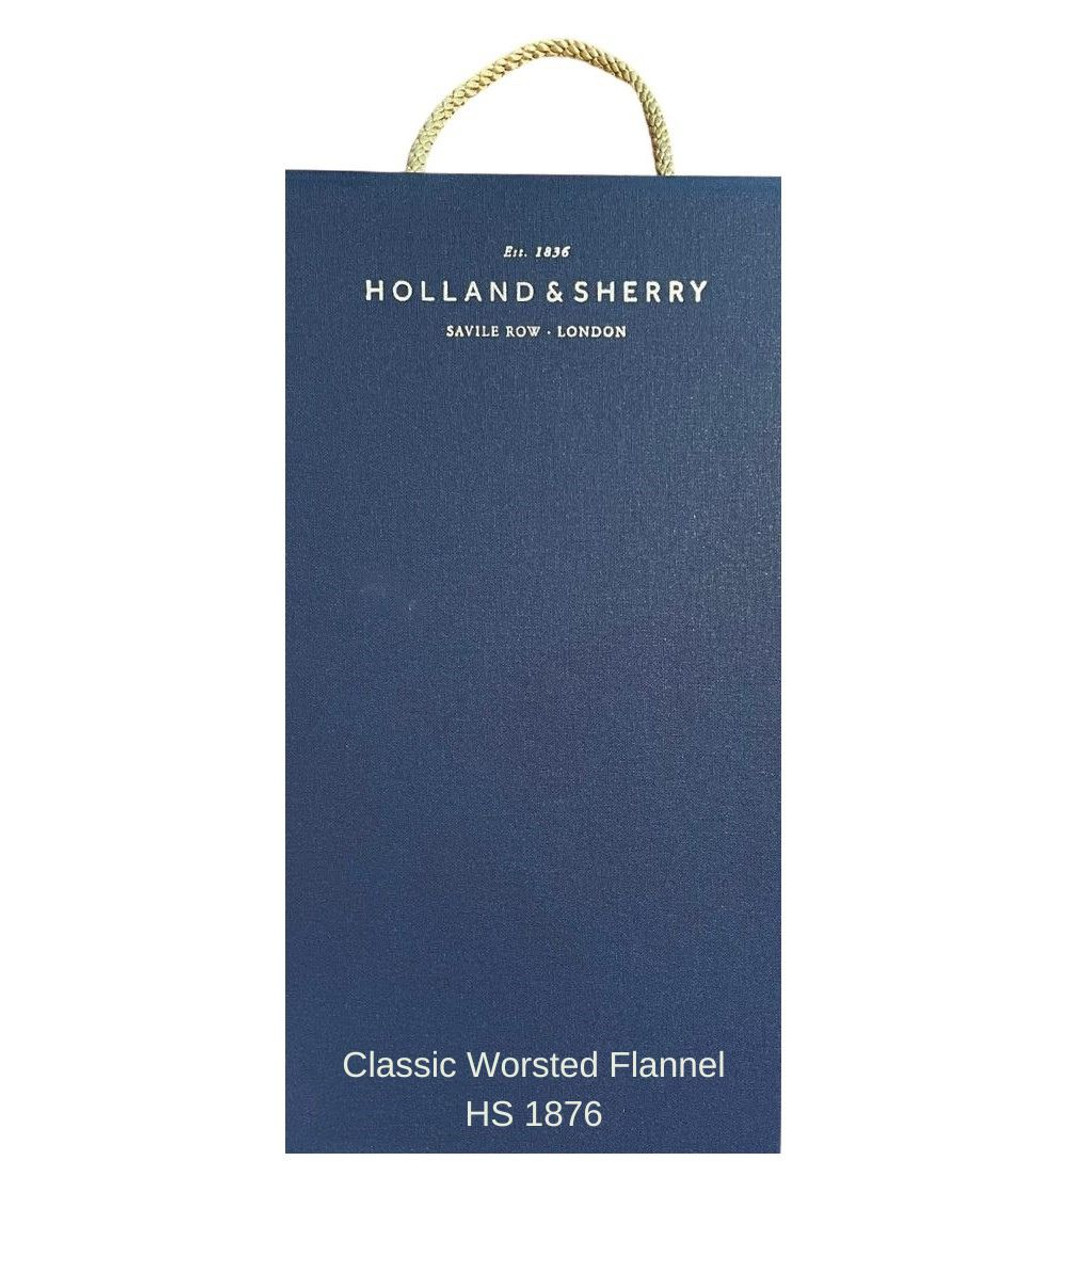 Holland & Sherry Classic Worsted Flannel Collection HS 1876